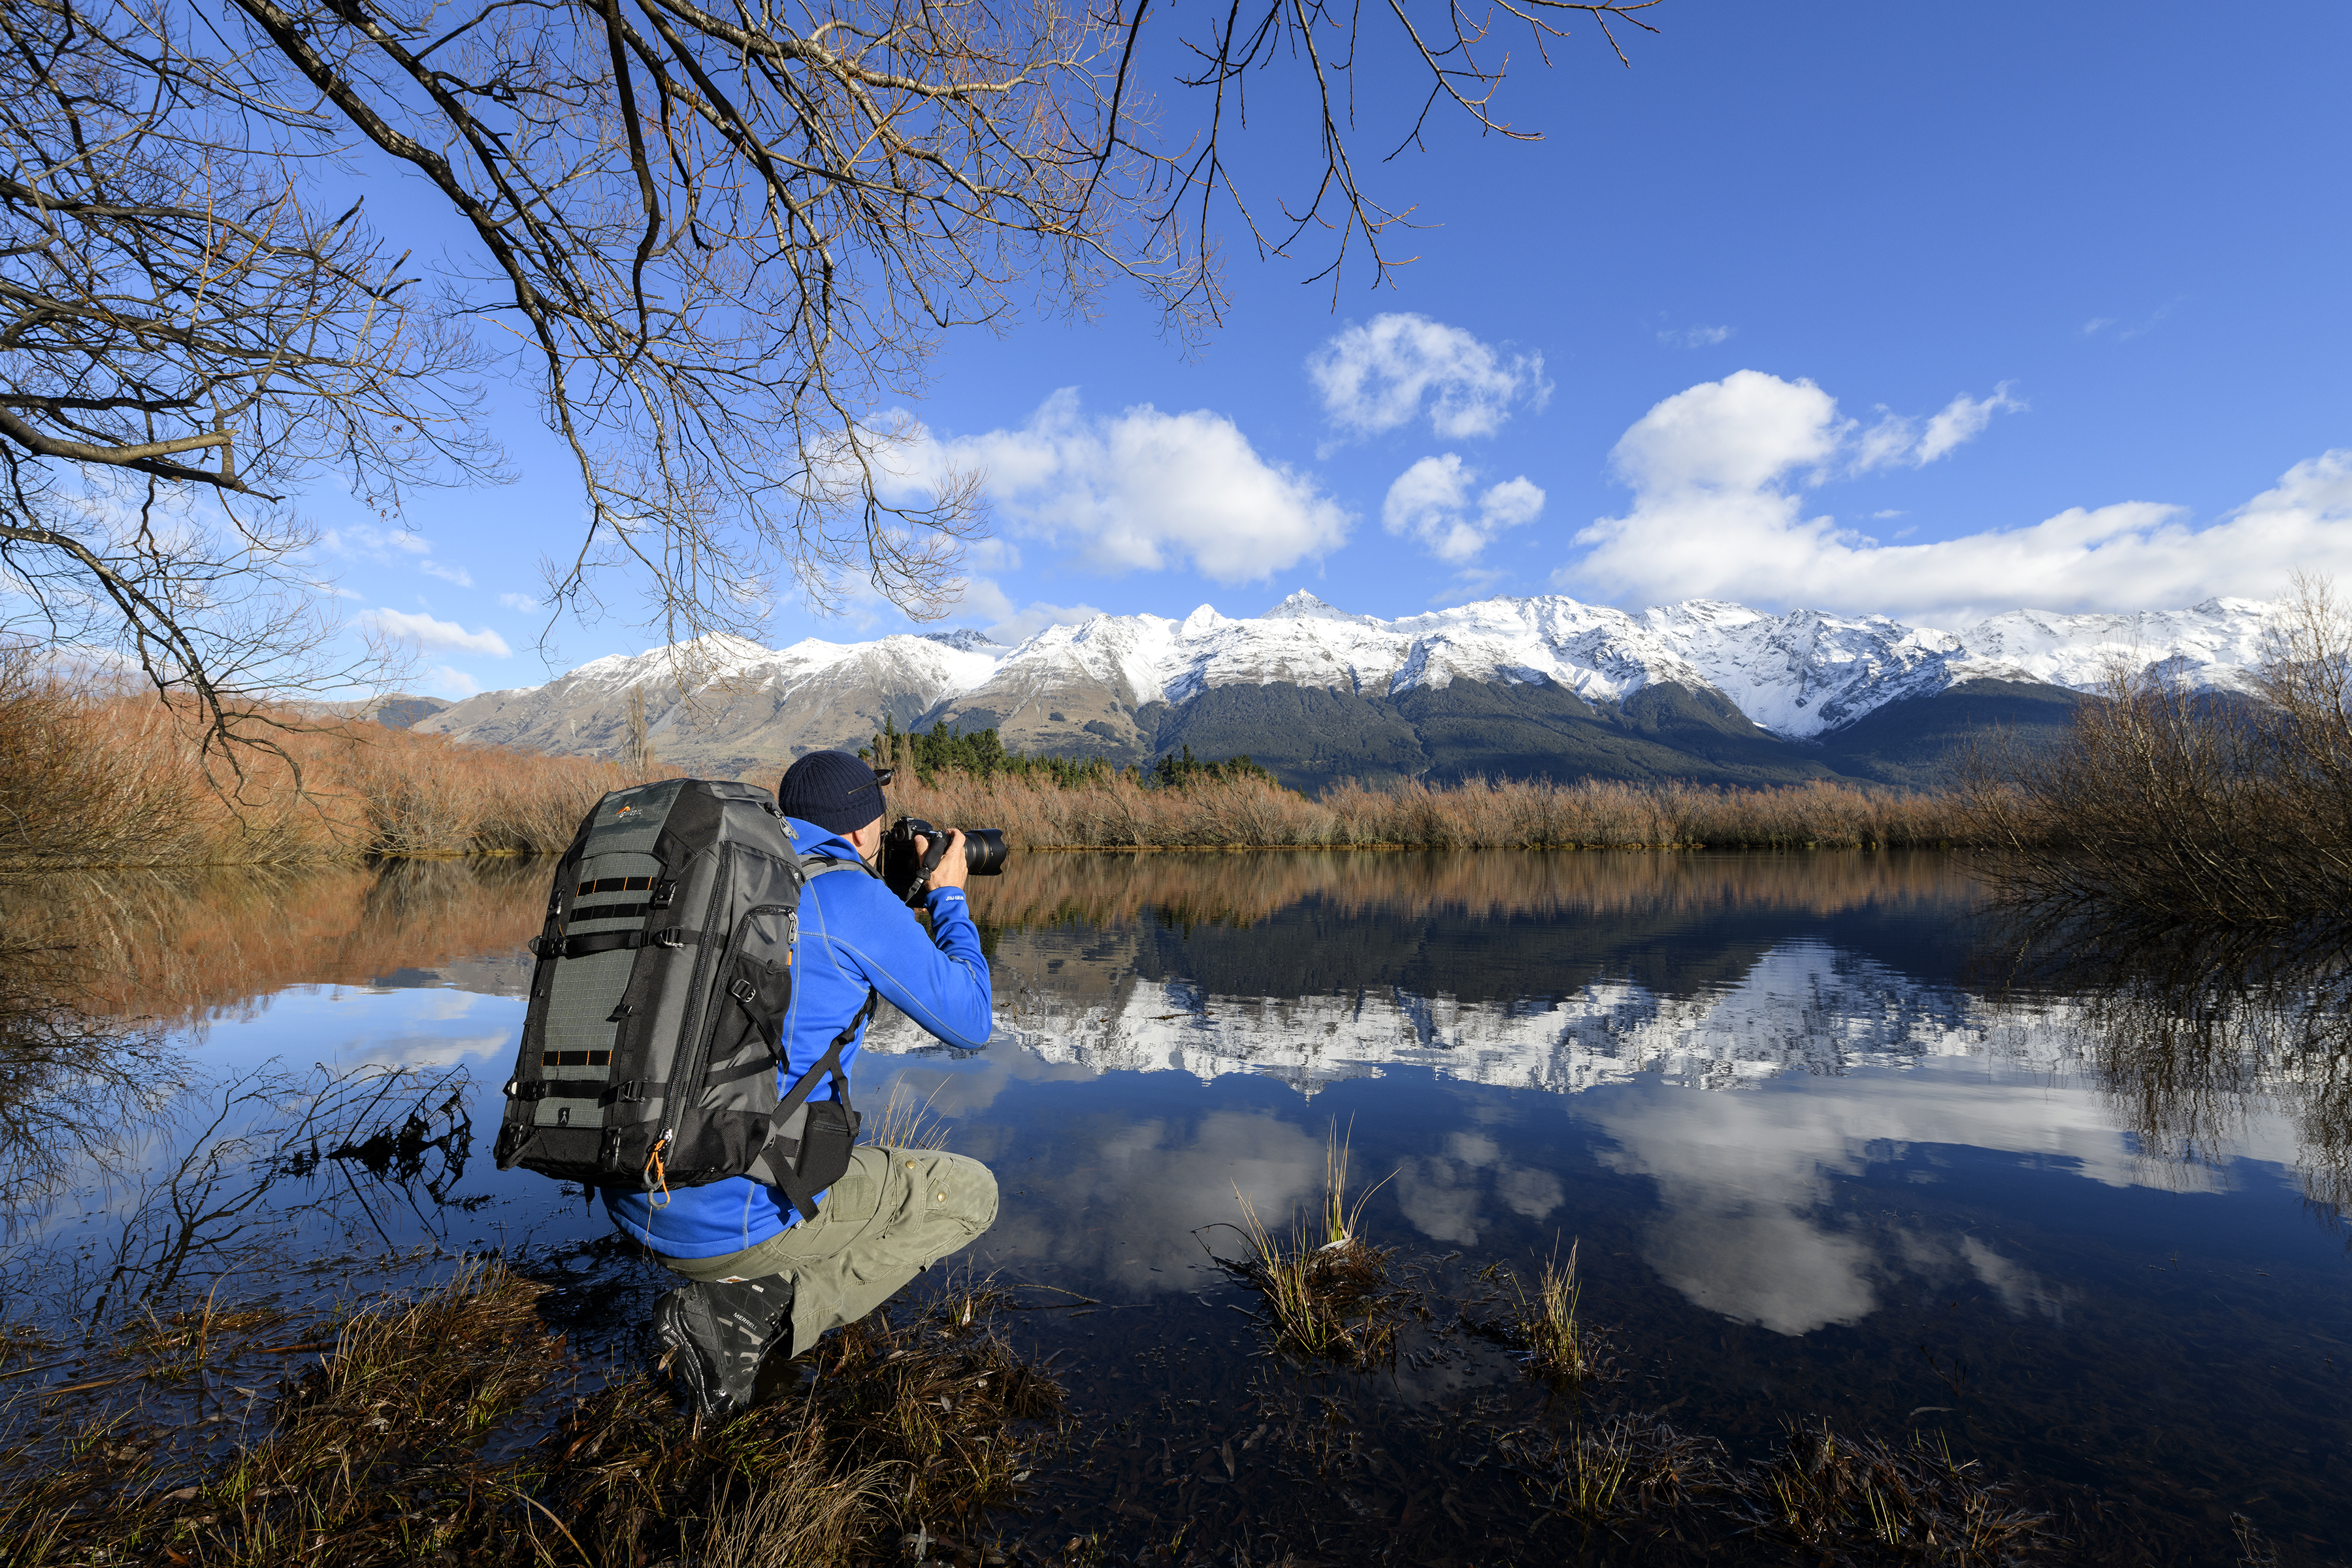 The Redesigned Lowepro Pro Trekker AW II Bags Are Carry-On Friendly